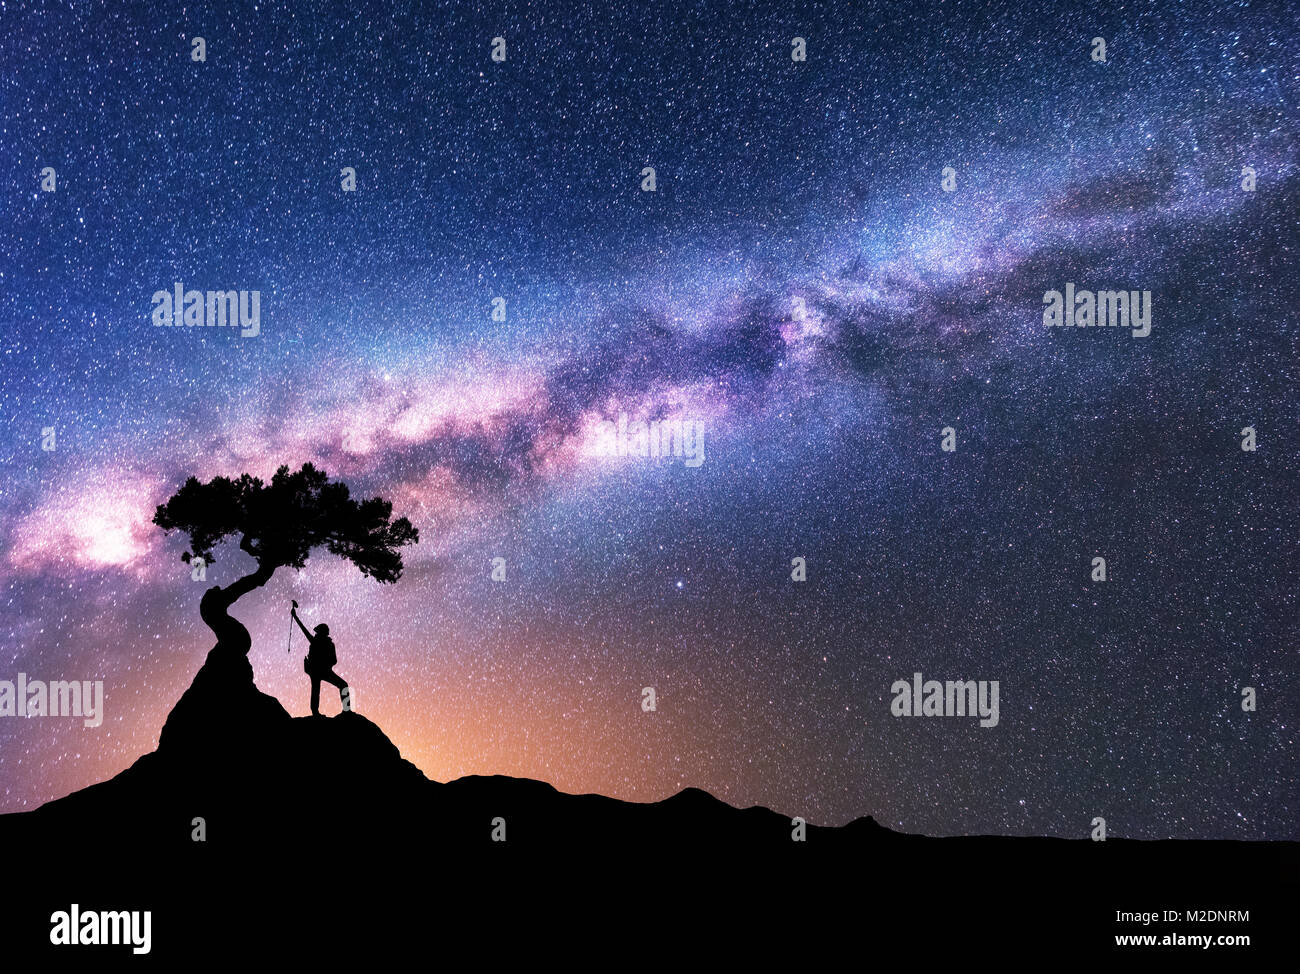 Milky Way and silhouette of woman under the tree growing from the rock on the mountain at night. Space background with starry sky, beautiful galaxy an Stock Photo